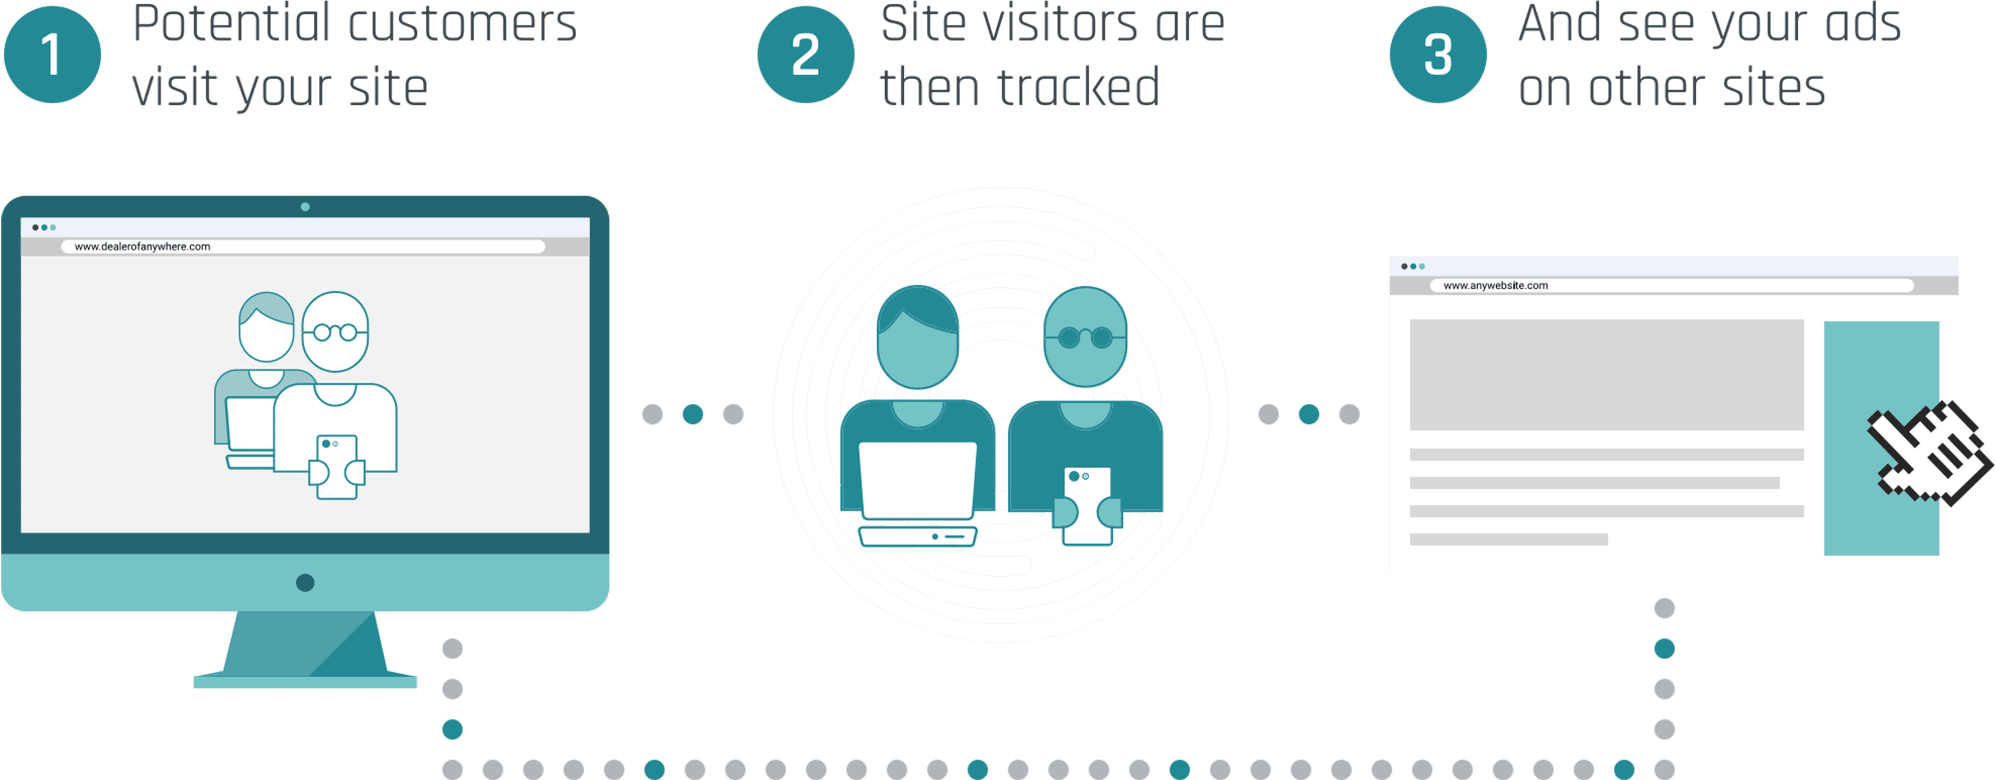 Target visitors to your website